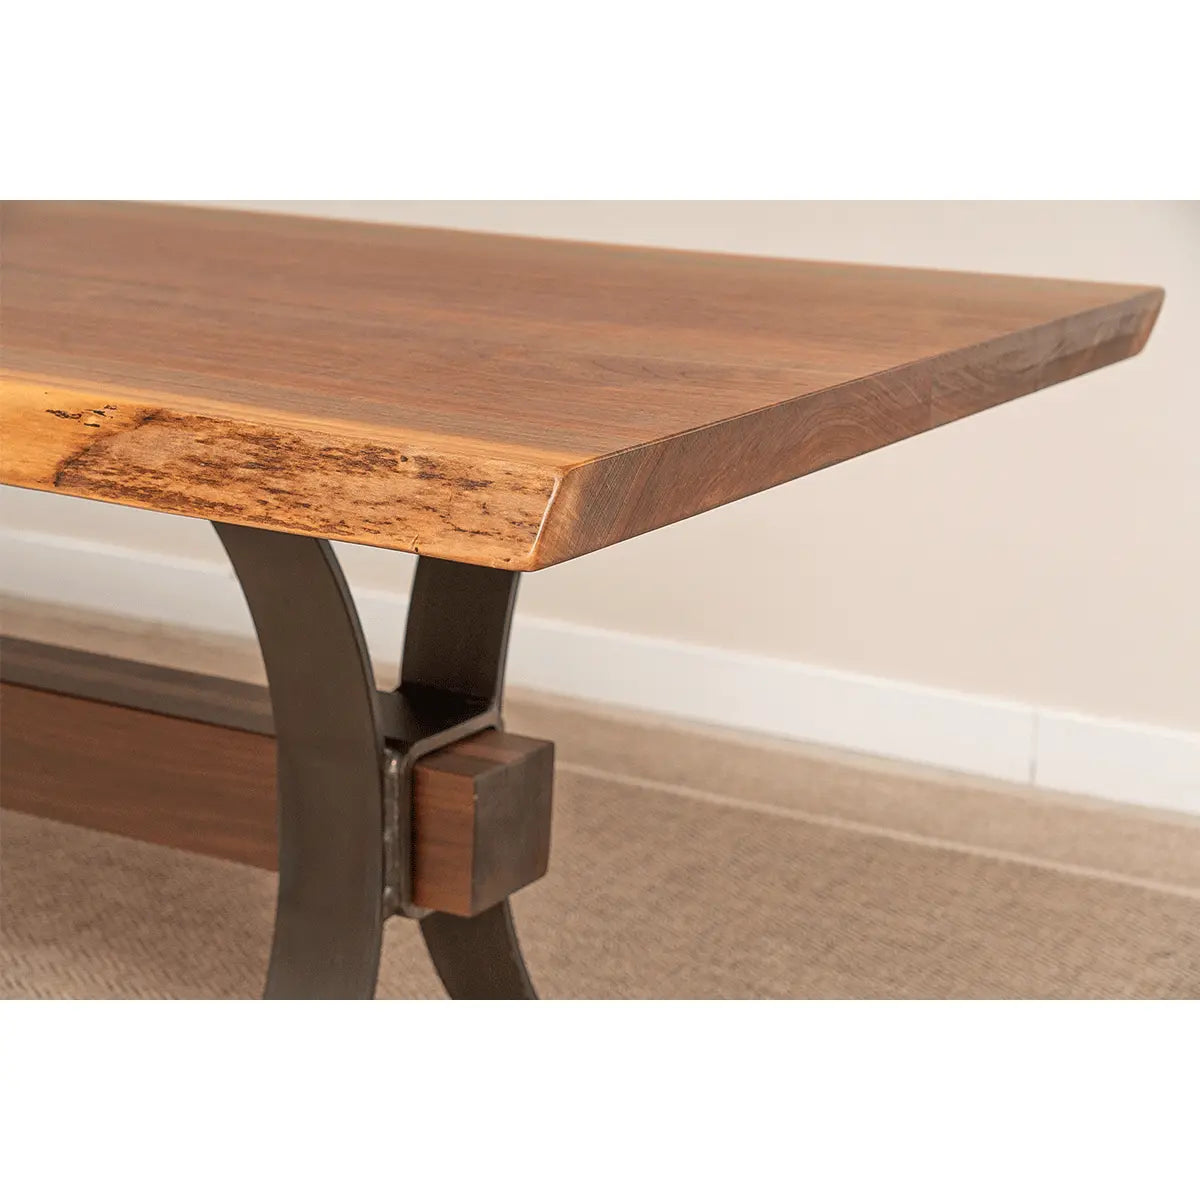 Details of Industrial Modern Live Edge Wood Table